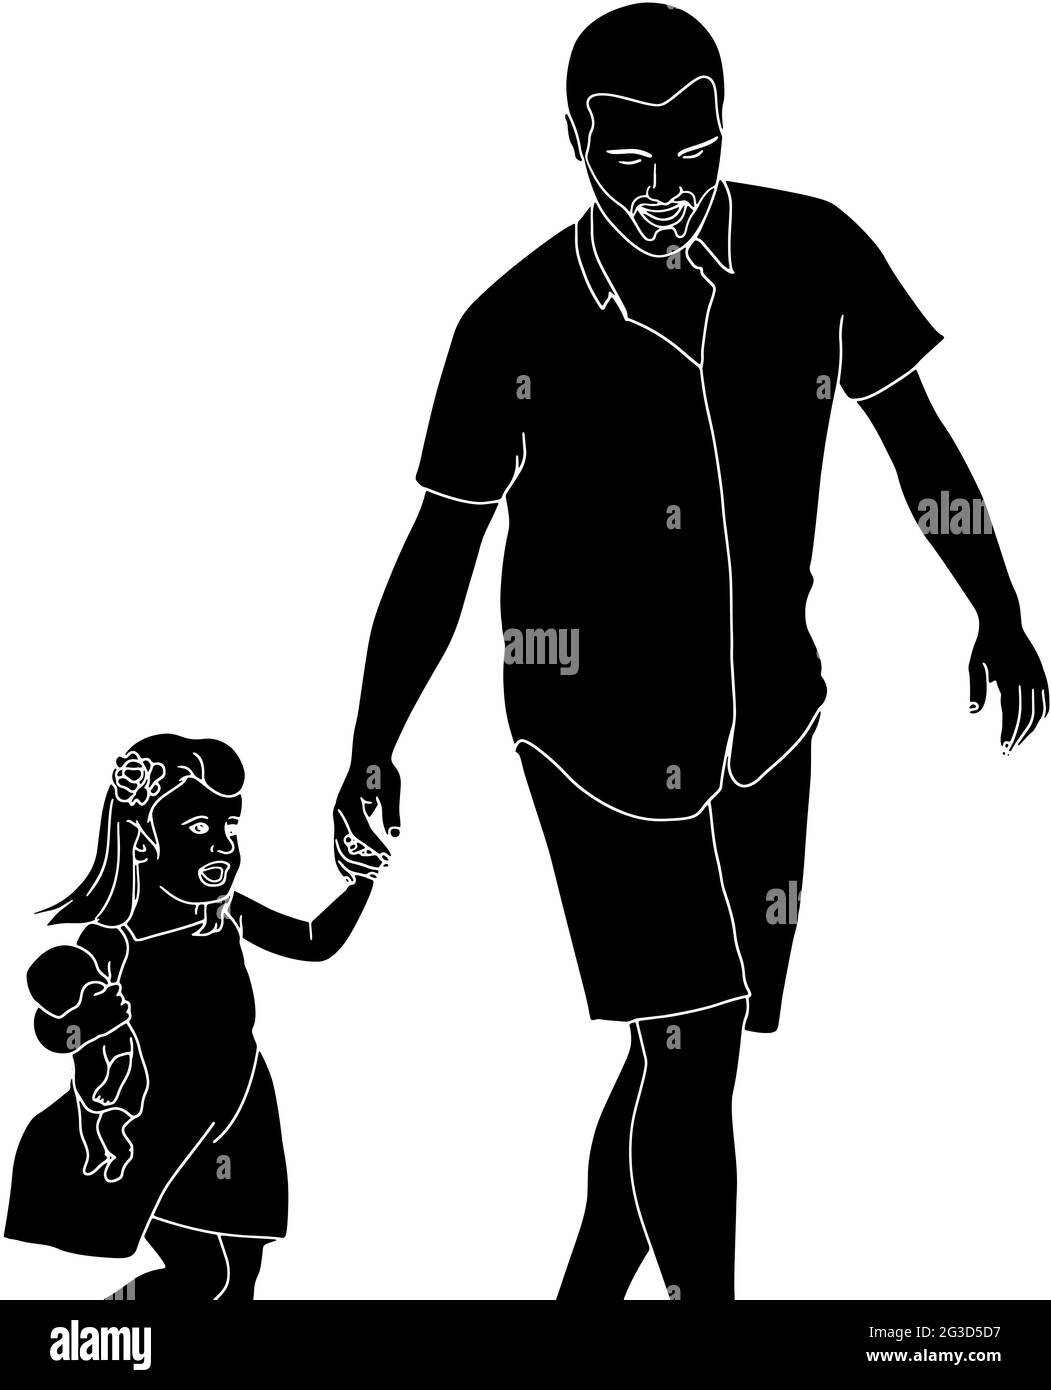 Illustration of a father and child bonding moment on a white background Stock Photo